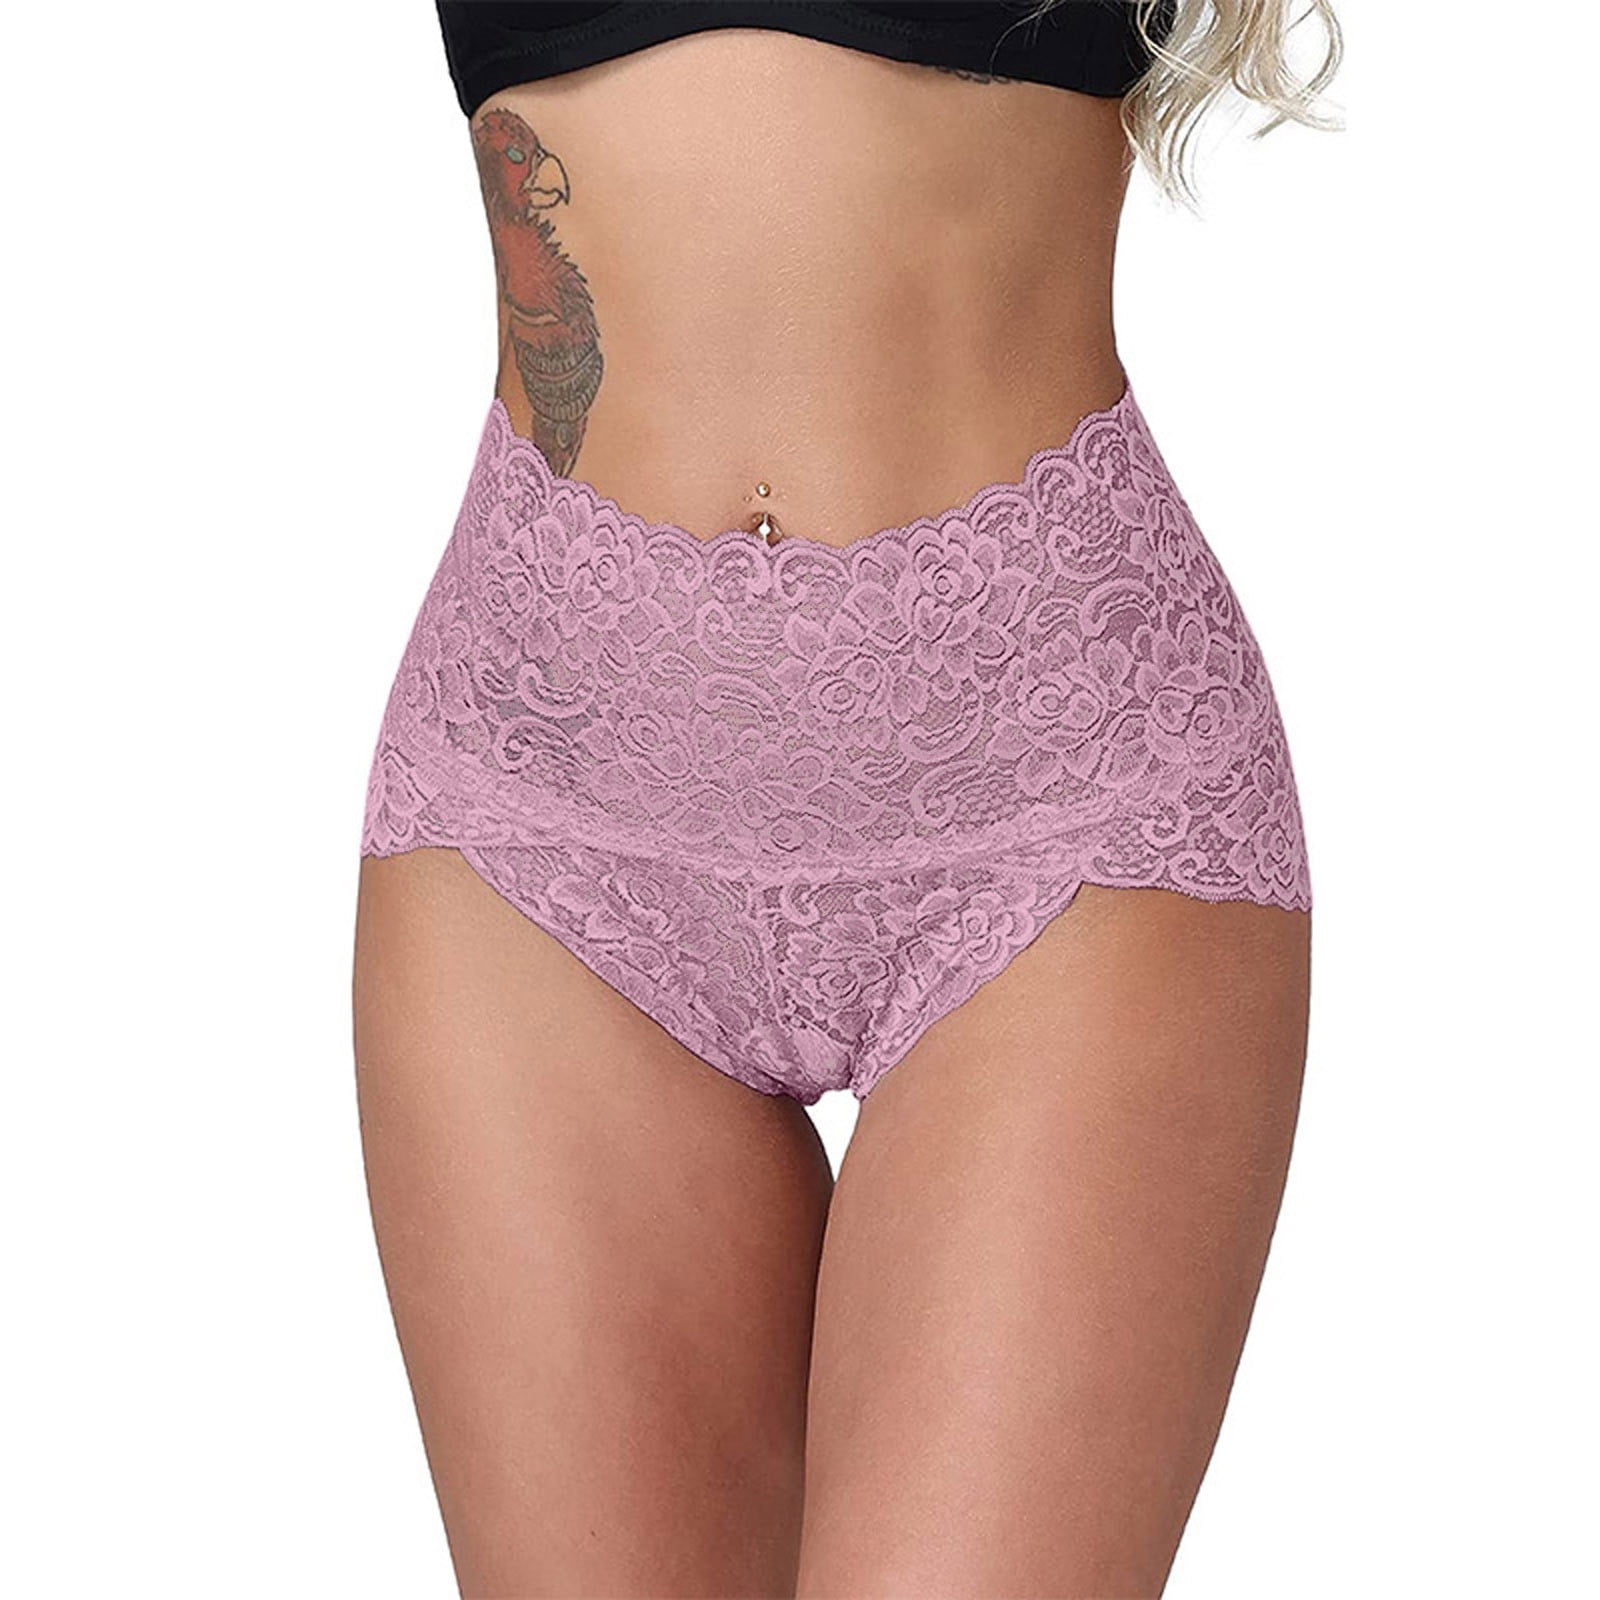 Xysaqa Women's French Cut Boyshort Sexy Lace Underwear High Waist Hipster  Panties Ladies Briefs Full Back Coverage Panties M-3XL on Clearance